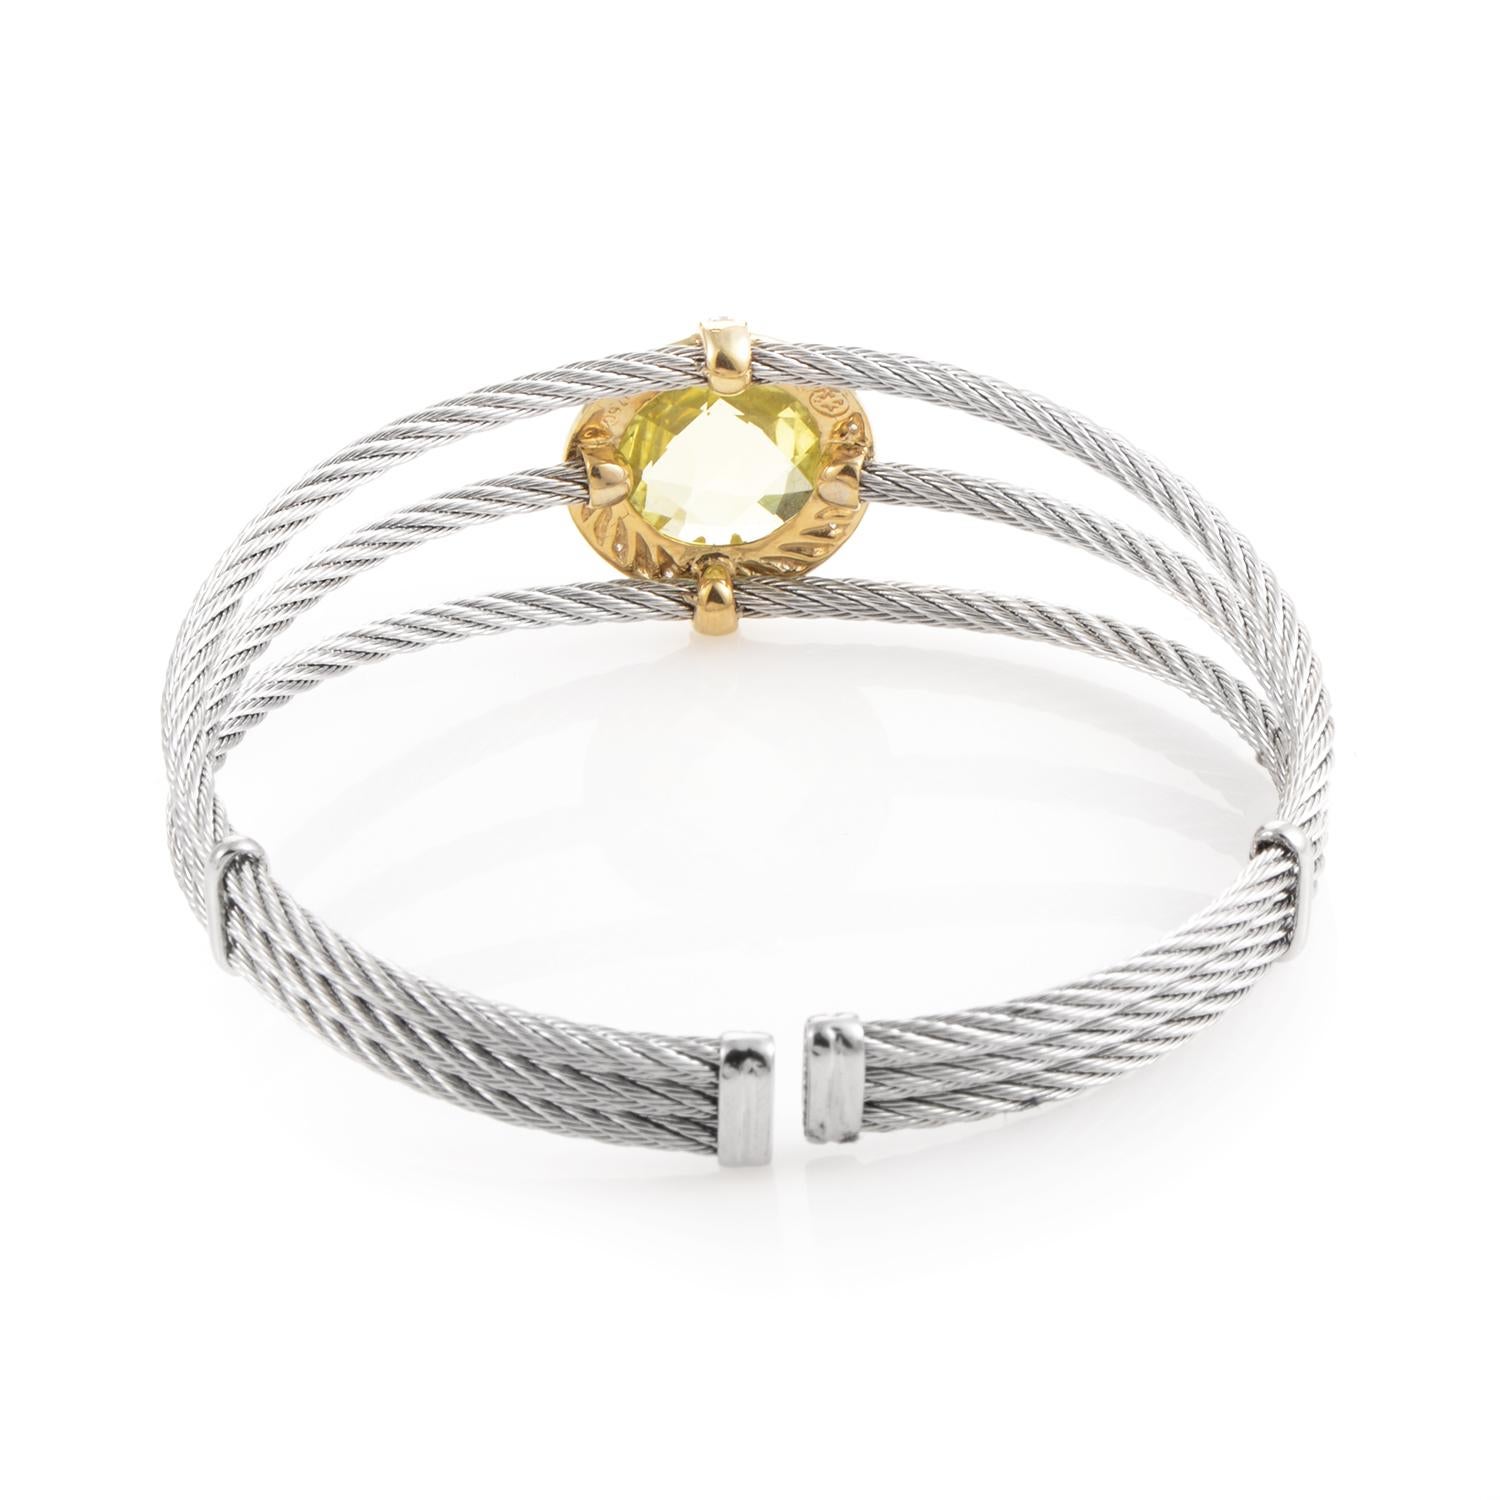 From Charriol's Celtic Classique Collection, this stainless steel Celtic Cable Bracelet boasts a round lemon citrine stone surrounded by .08ct white diamonds in an 18K yellow gold setting.
